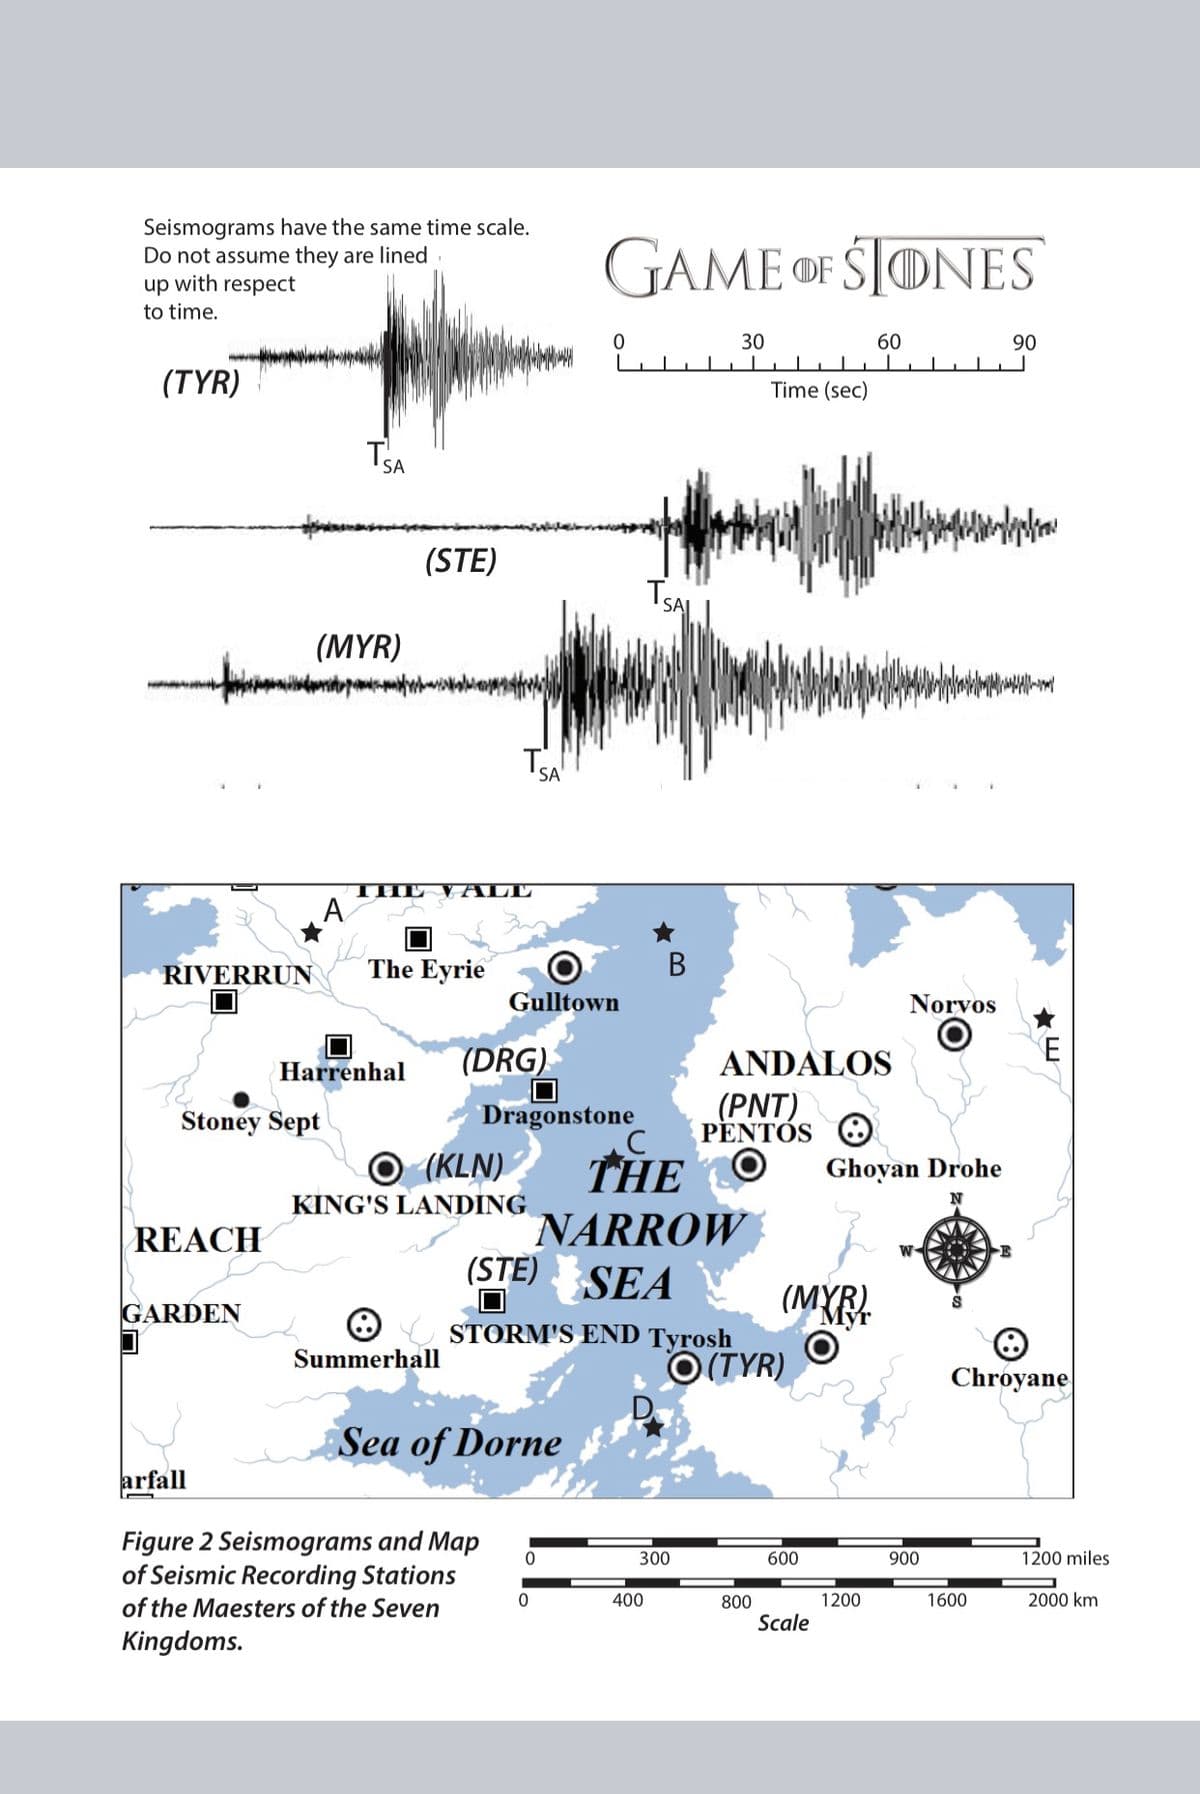 Seismograms have the same time scale.
Do not assume they are lined
up with respect
GAME OF SIONES
to time.
30
60
90
(TYR)
Time (sec)
(STE)
(MYR)
SA
THE V ALL
A
RIVERRUN
The Eyrie
В
Gulltown
Norvos
Harrenhal
(DRG)
ANDALOS
Dragonstone
(PNT)
PENTÓS
Stoney Sept
O (KLN)
THE
NARROW
(STE)
Ghoyan Drohe
KING'S LANDING
REACH
SEA
(MYR
GARDEN
STORM'S END Tyrosh
Summerhall
O(TYR)
Chroyane
Sea of Dorne
arfall
Figure 2 Seismograms and Map
of Seismic Recording Stations
of the Maesters of the Seven
300
600
900
1200 miles
400
2000 km
800
Scale
1200
1600
Kingdoms.
